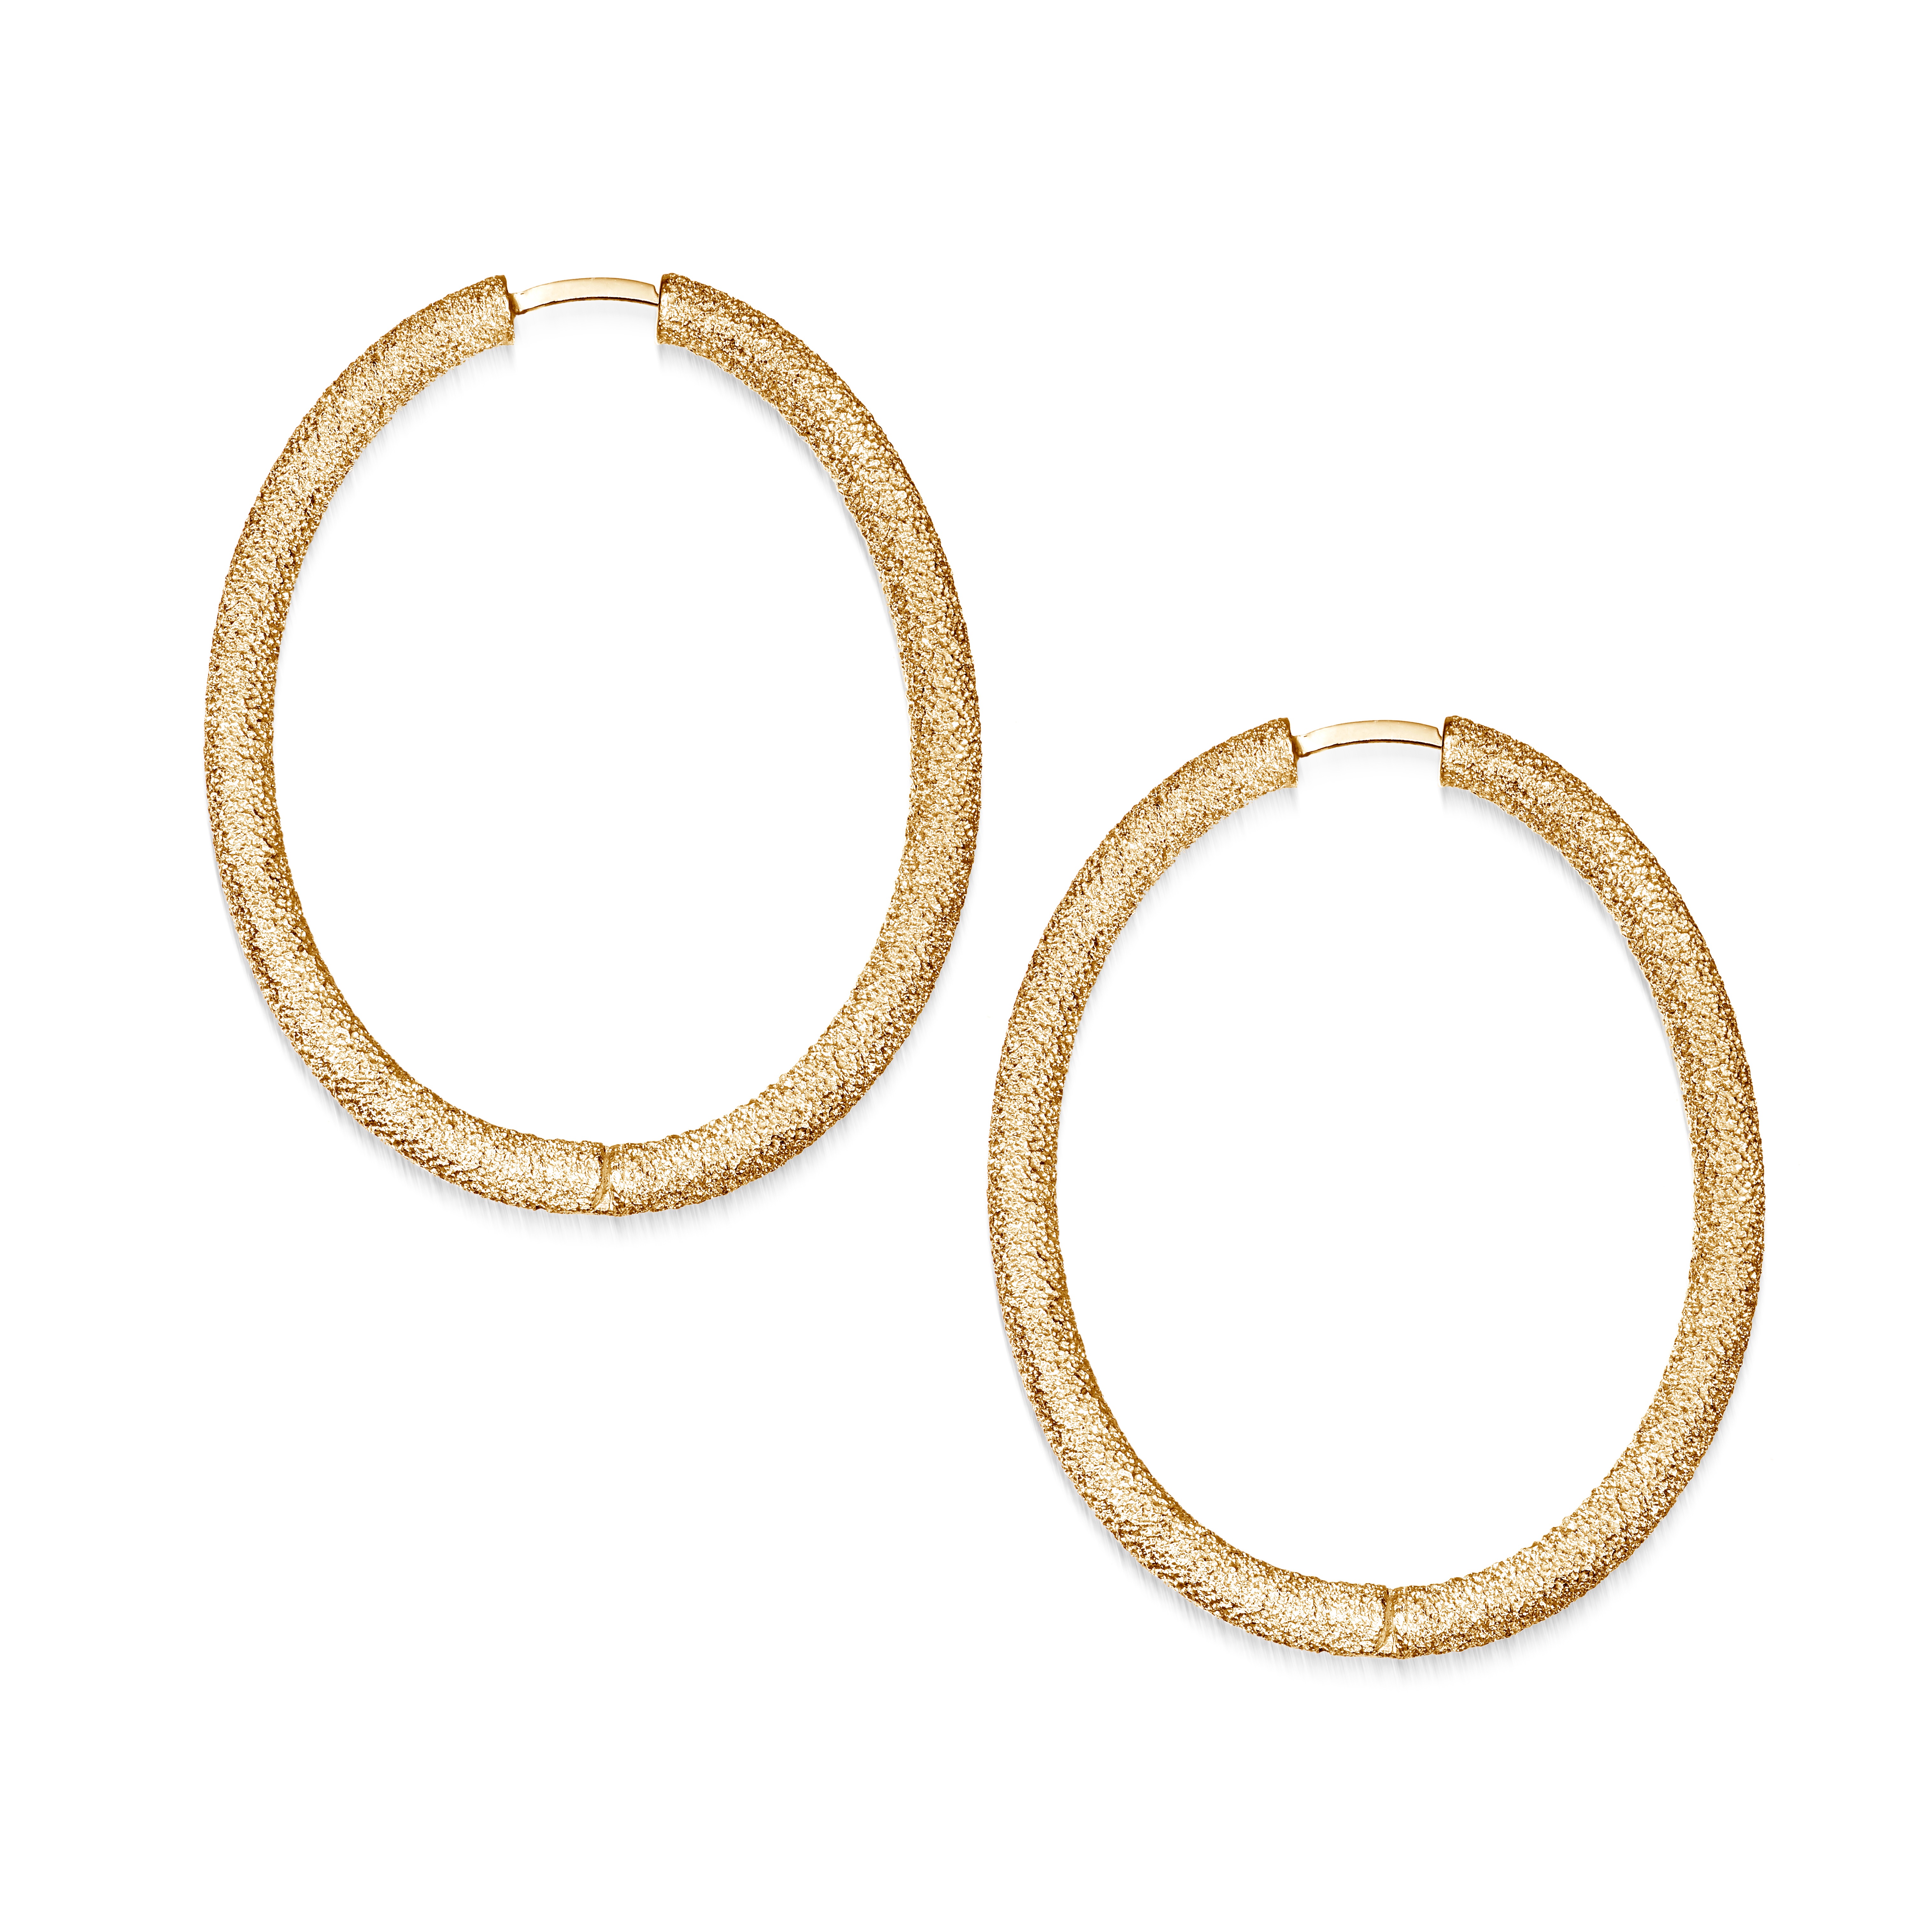 Matte Silver Thick Frosted Oval Hoop Earrings